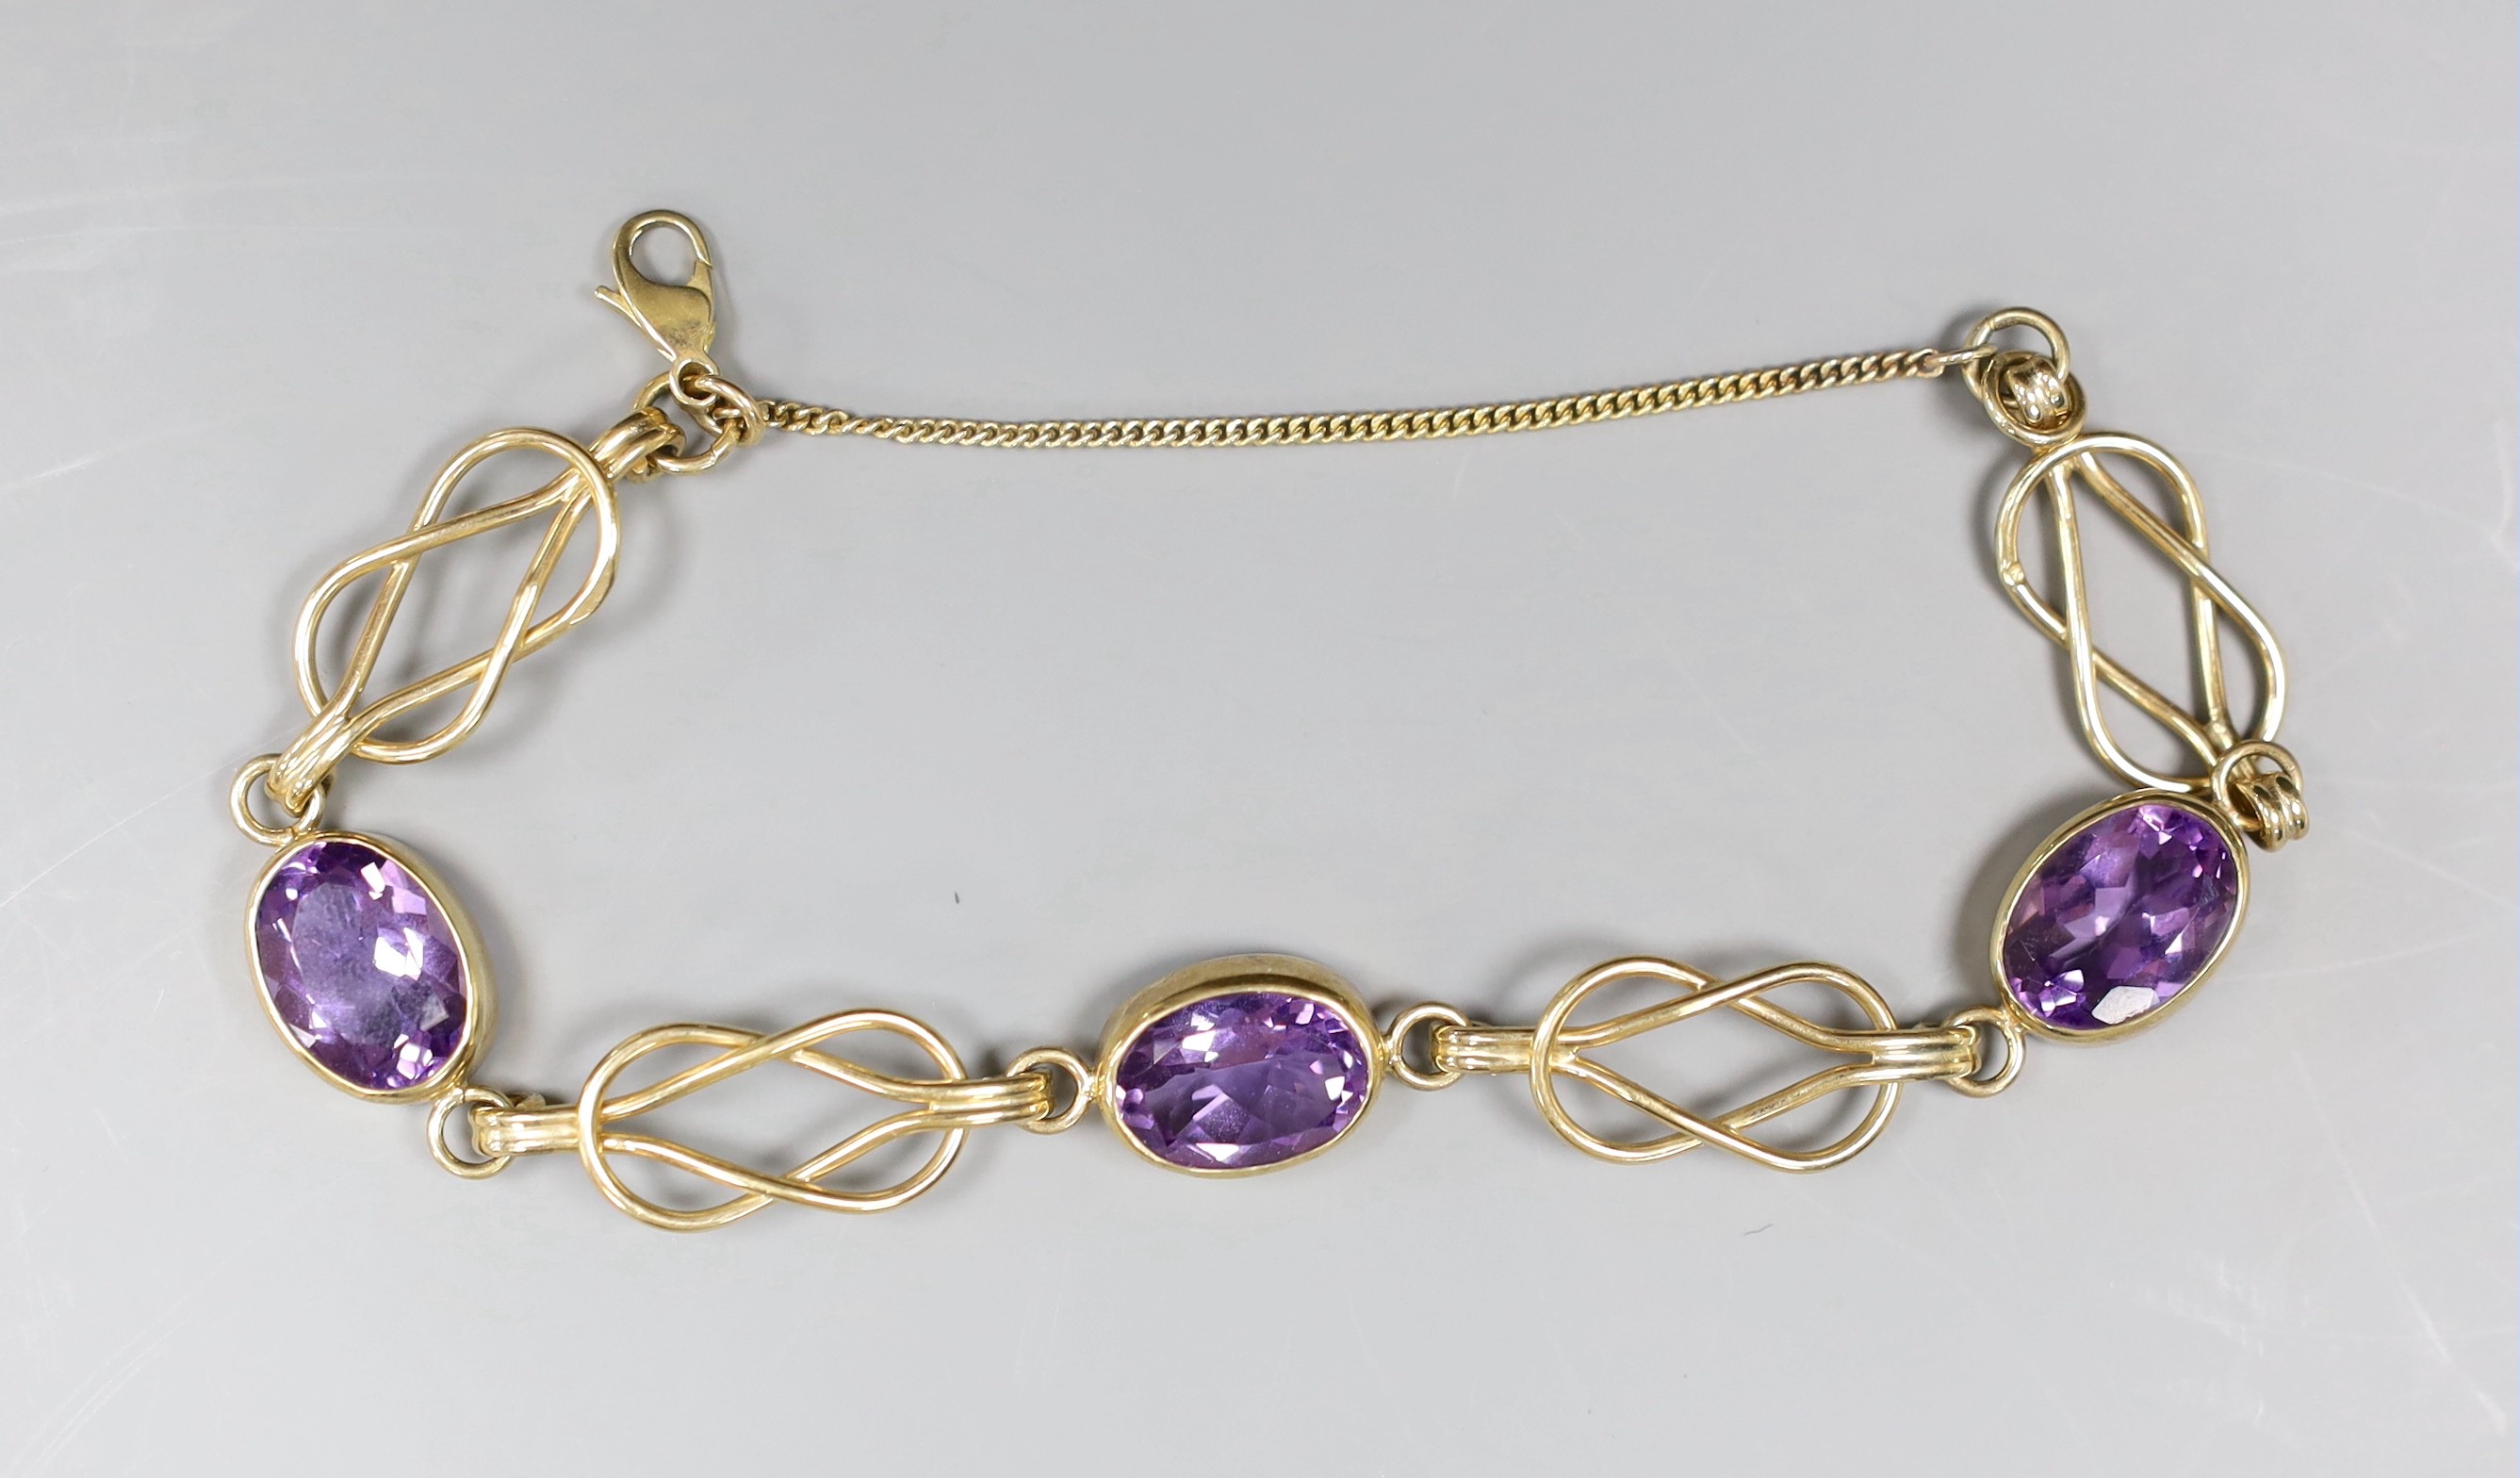 A 9ct gold and amethyst bracelet, gross 16.9 grams